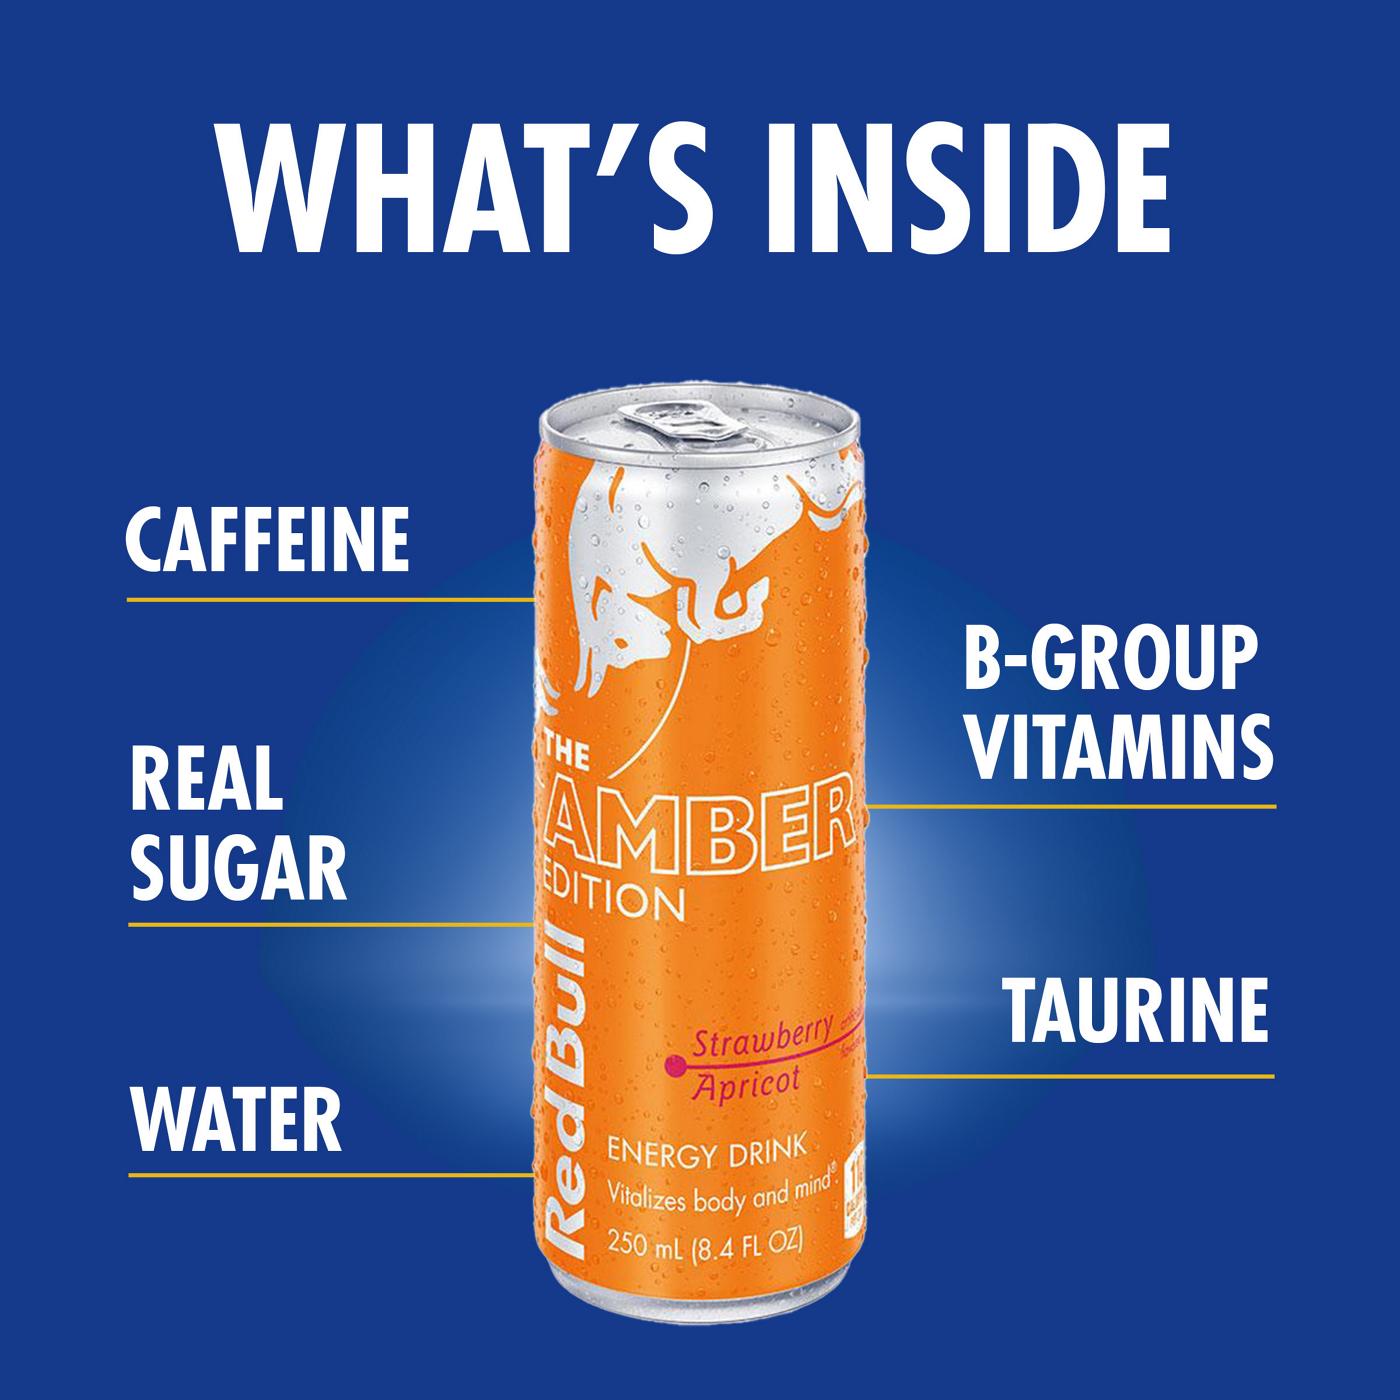 Red Bull The Amber Edition Strawberry Apricot Energy Drink; image 6 of 7